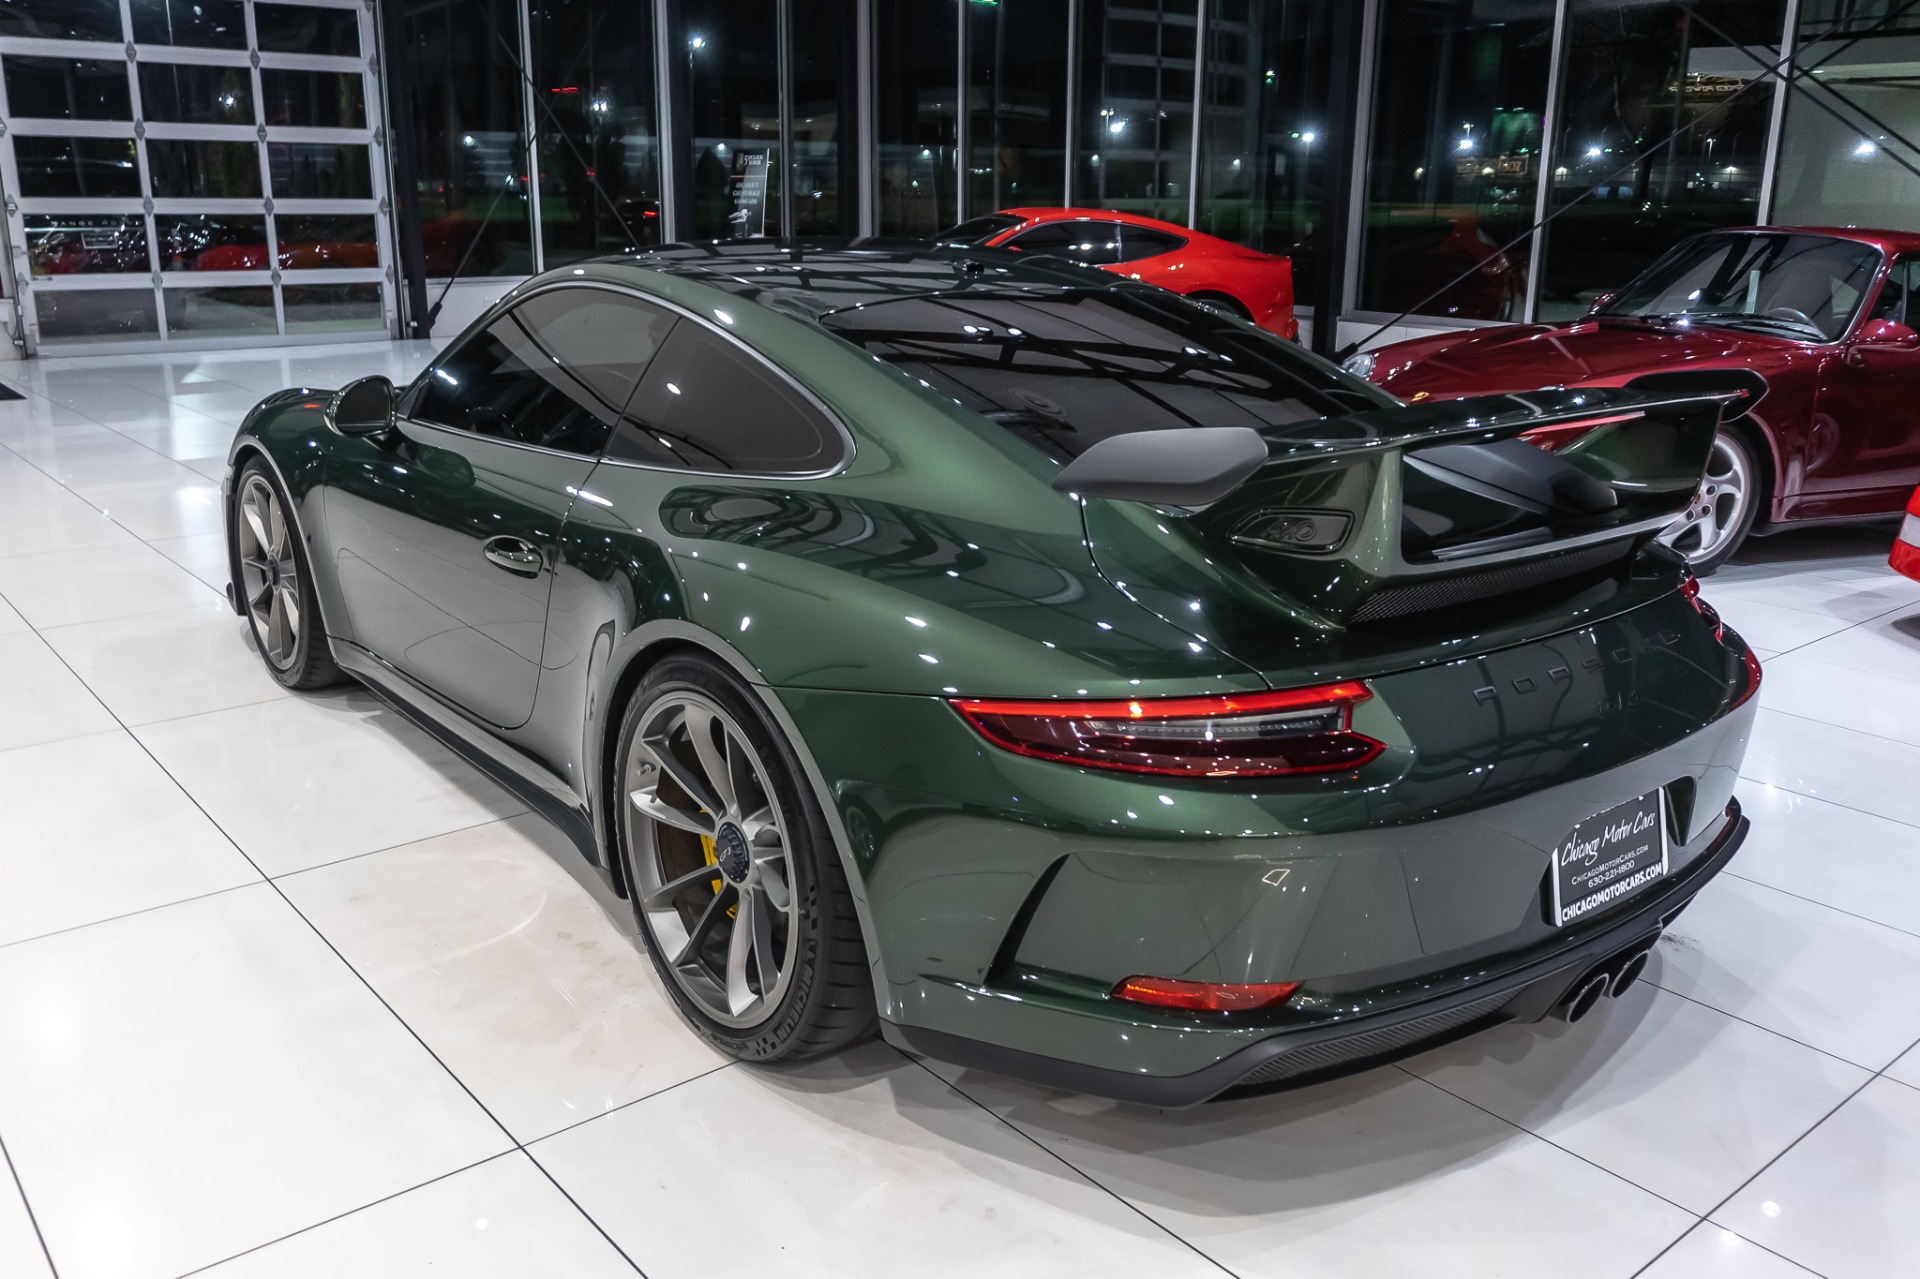 Used-2018-Porsche-911-GT3-COUPE-6-SPEED-PCCB-FRONT-AXLE-LIFT-LIGHT-DESIGN-PKG-PAINT-TO-SAMPLE-HUGE-MSR